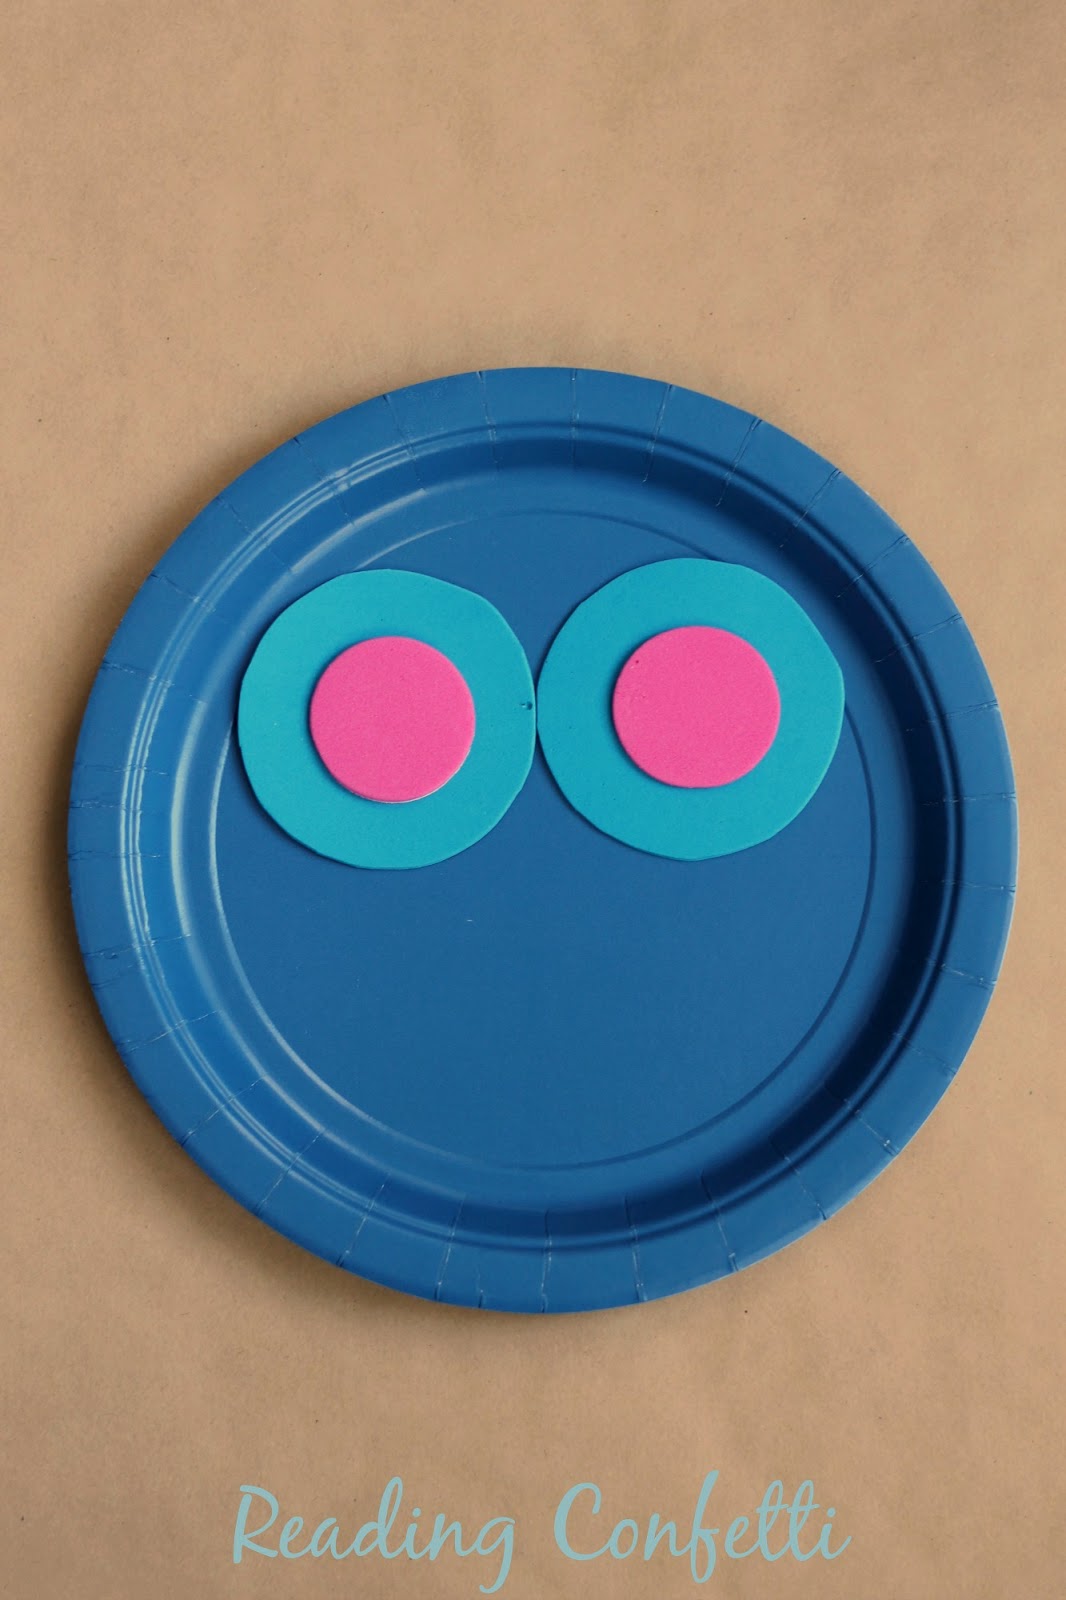 An easy paper plate owl craft